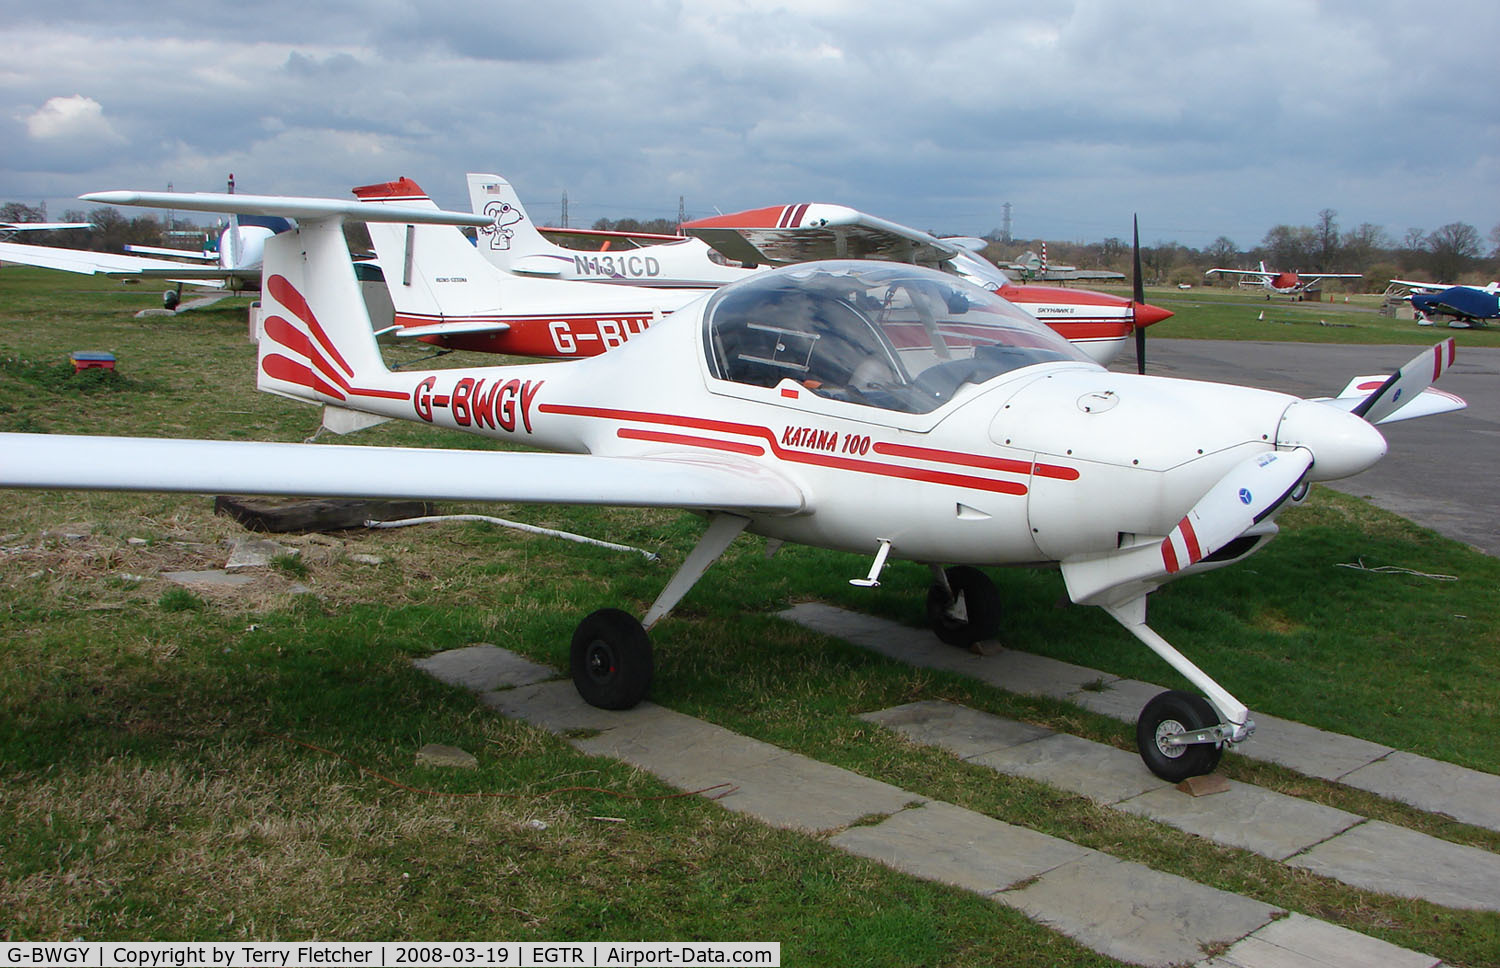 G-BWGY, 1995 HOAC DV-20 Katana C/N 20134, Part of the busy GA scene at Elstree Airfield in the northern suburbs of London